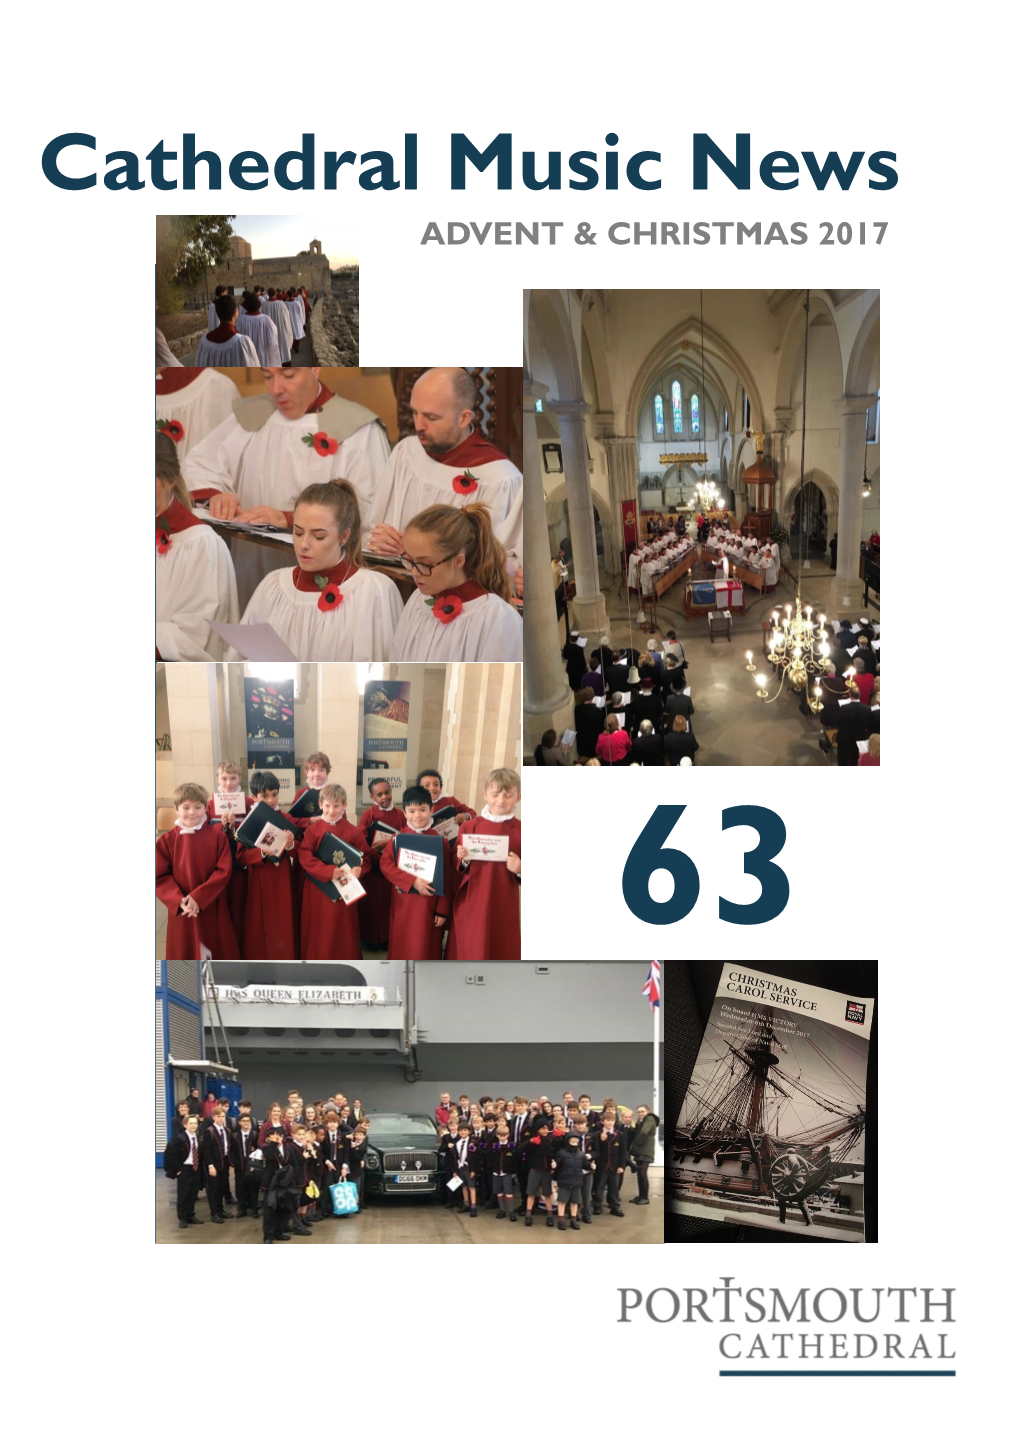 Cathedral Music News ADVENT & CHRISTMAS 2017